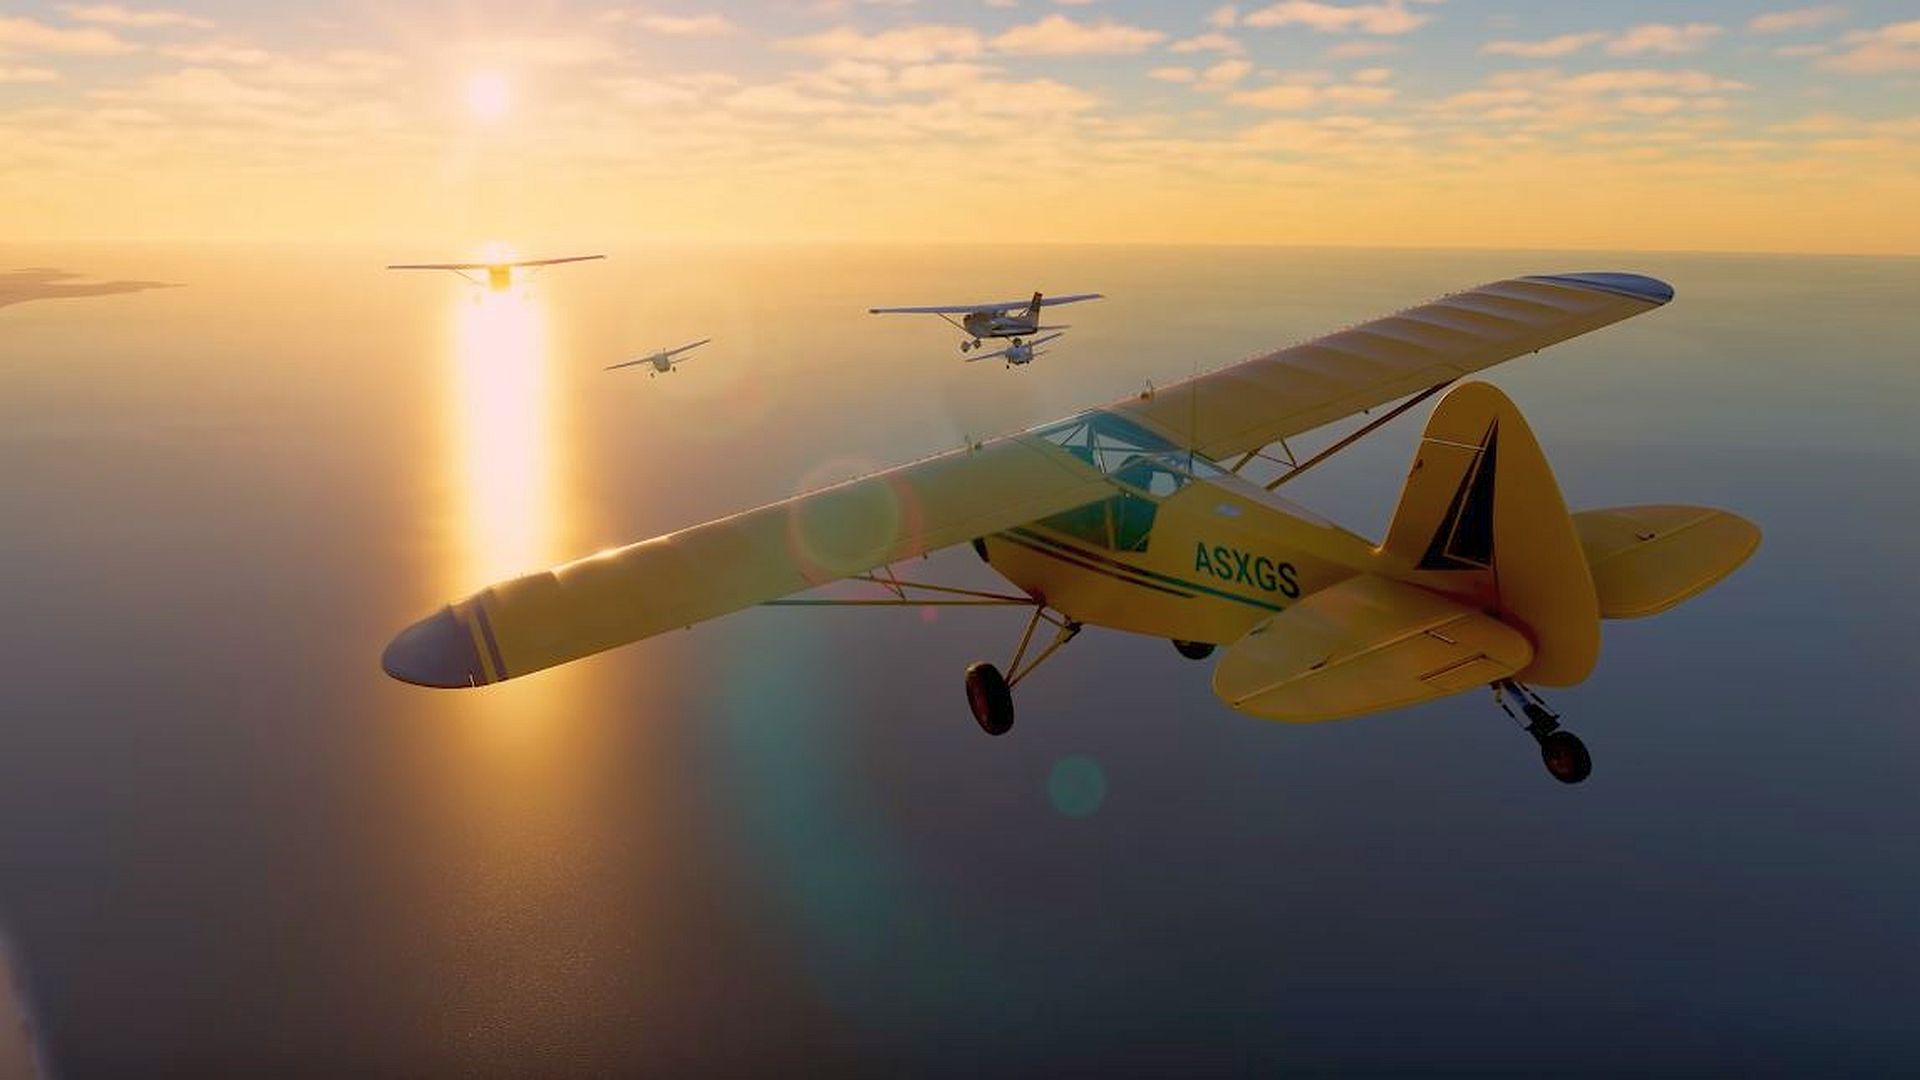 Microsoft Flight Simulator now “only” needs 83GB of drive space